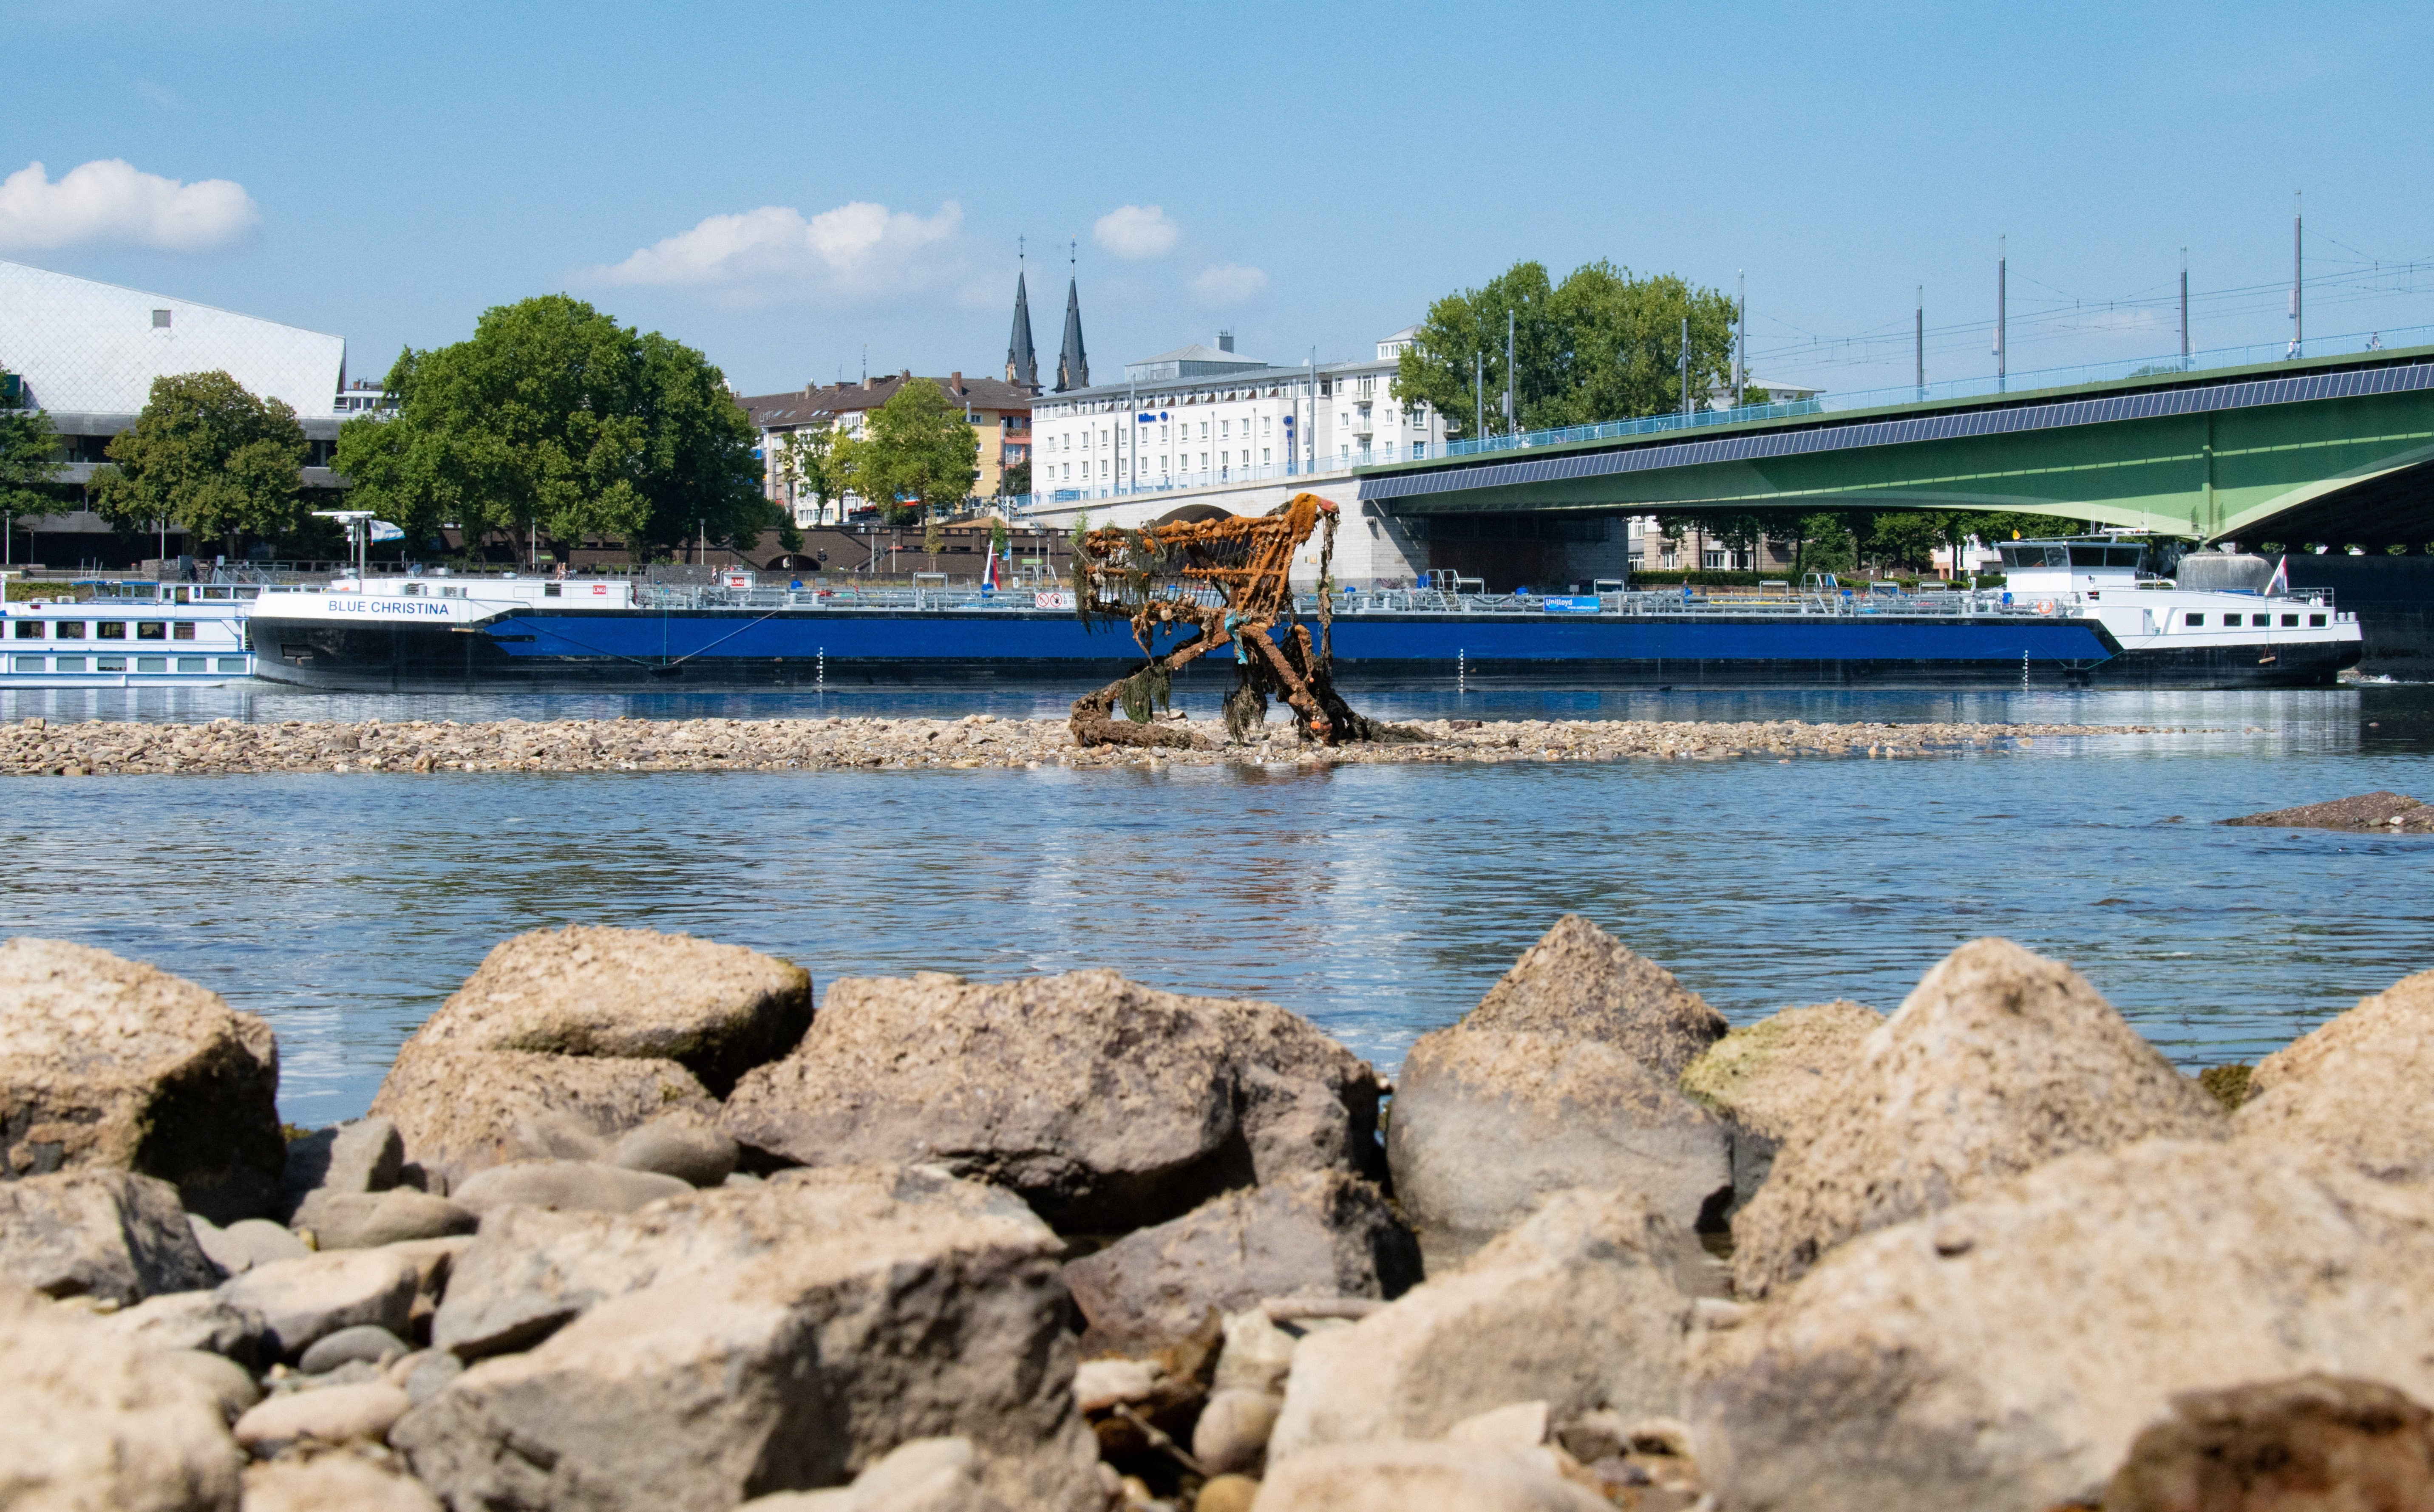 Drought means low water levels in Rhine